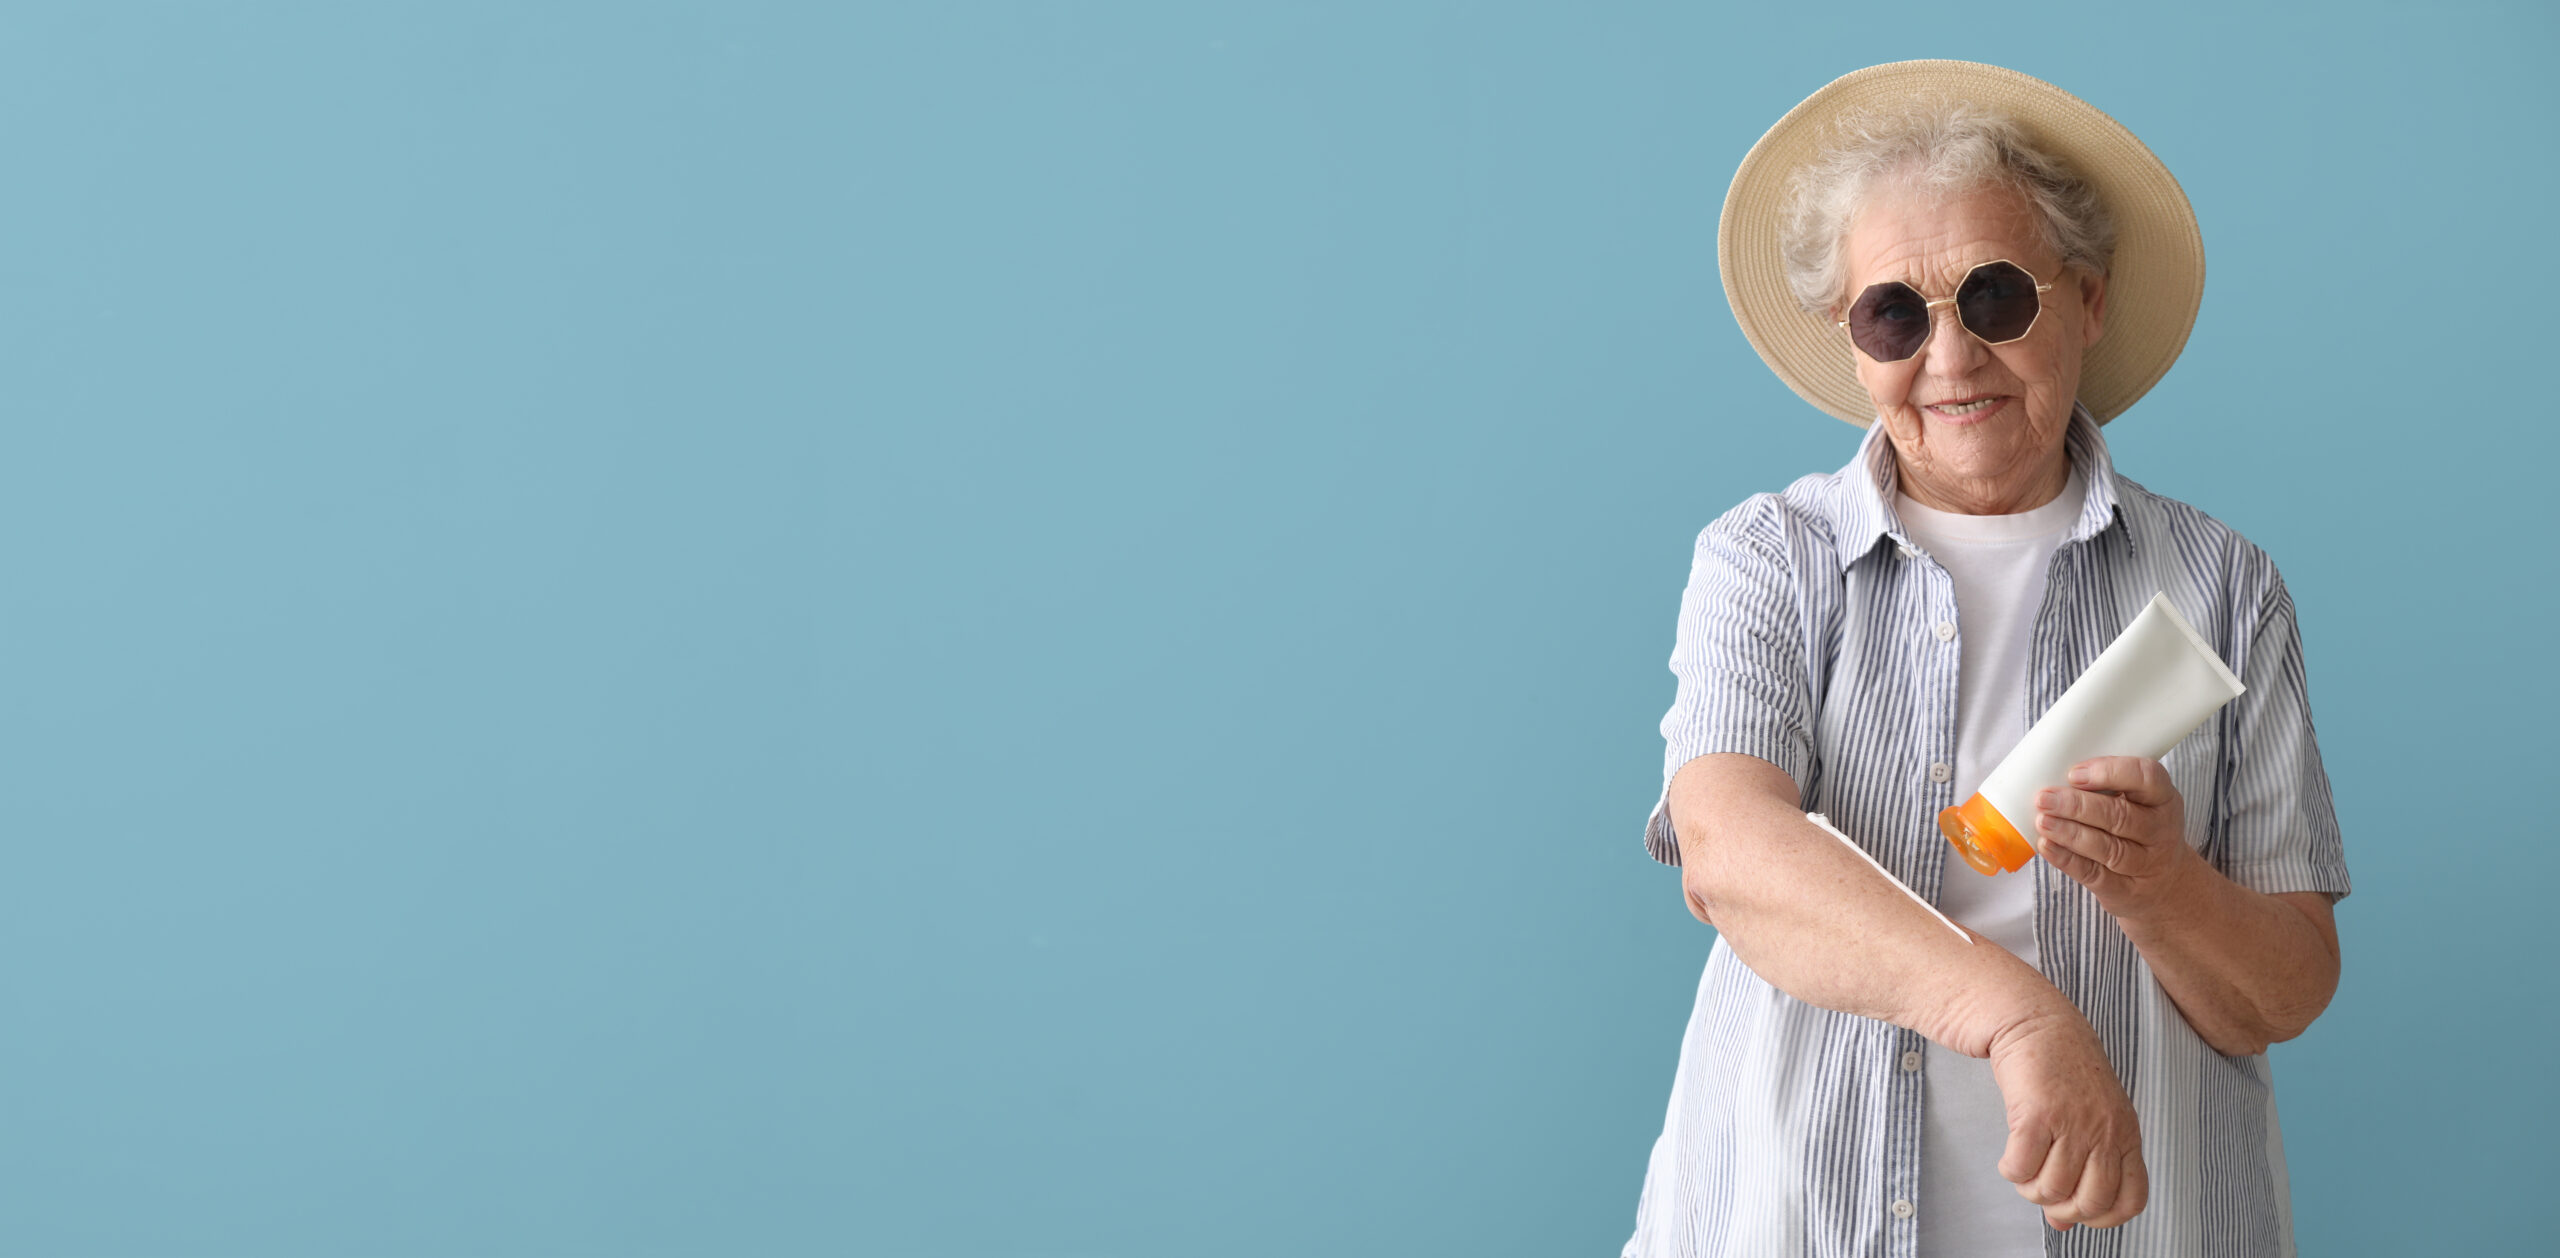 An elderly woman in a sun hat and sunglasses applies sunscreen to her arm in front of a blue background.